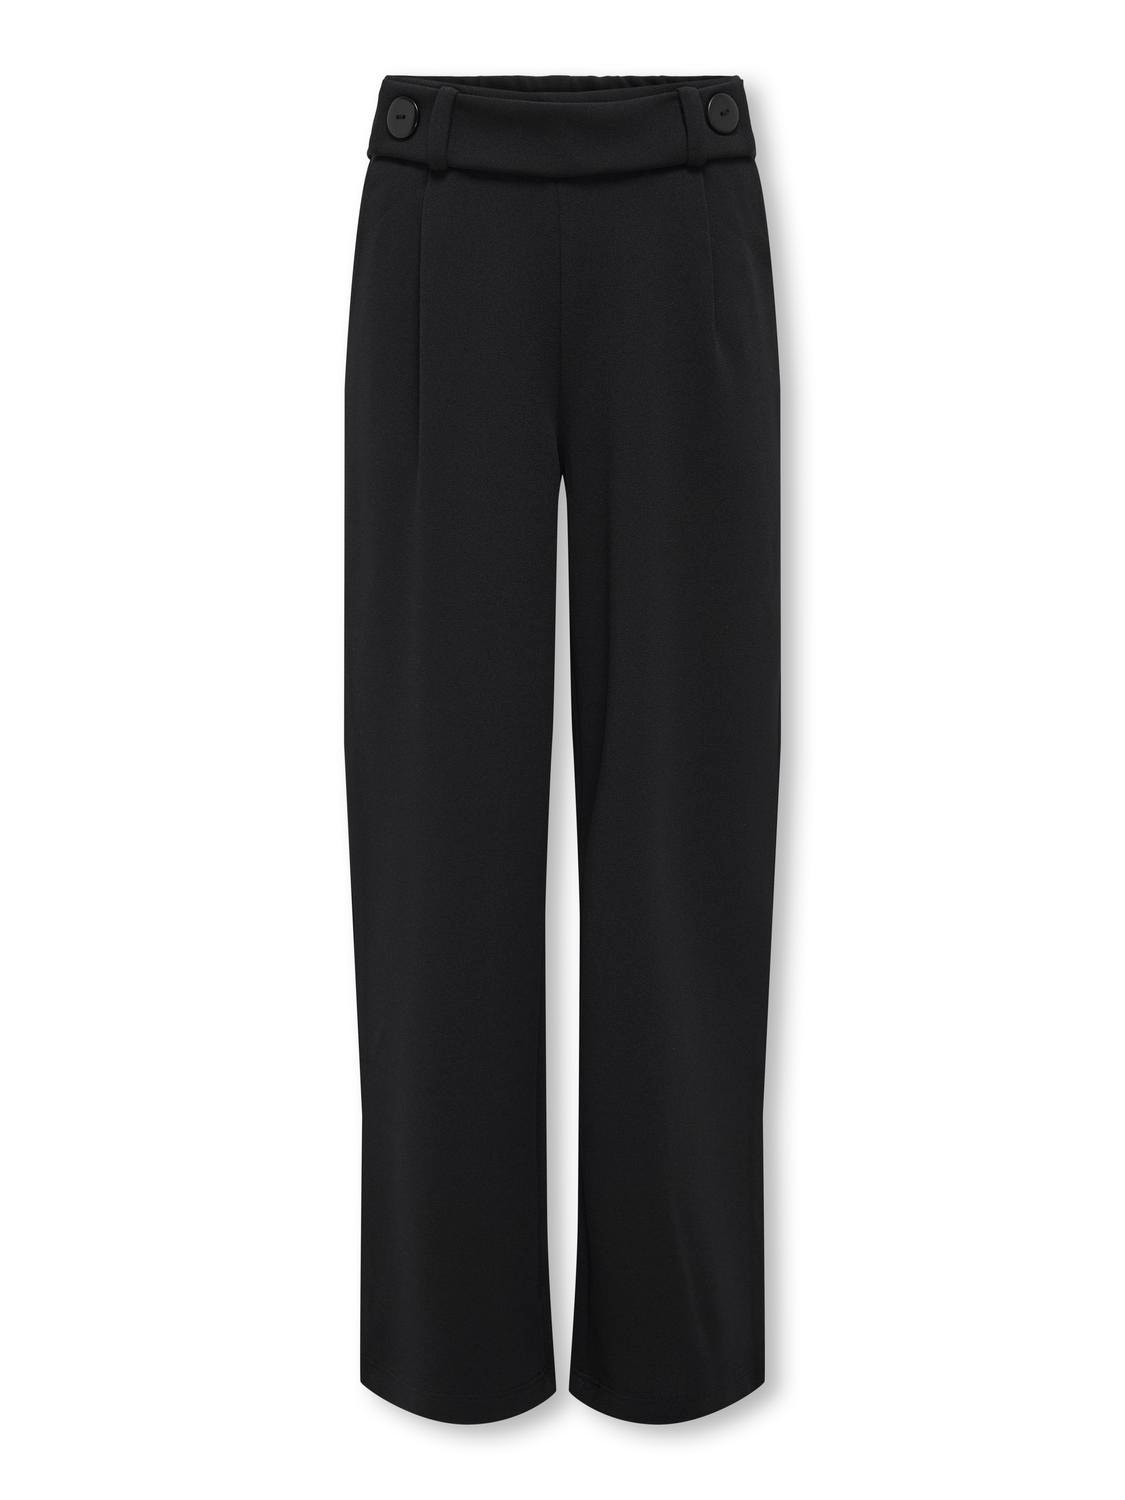 ONLY Classic pull-up pants -Black - 15327742